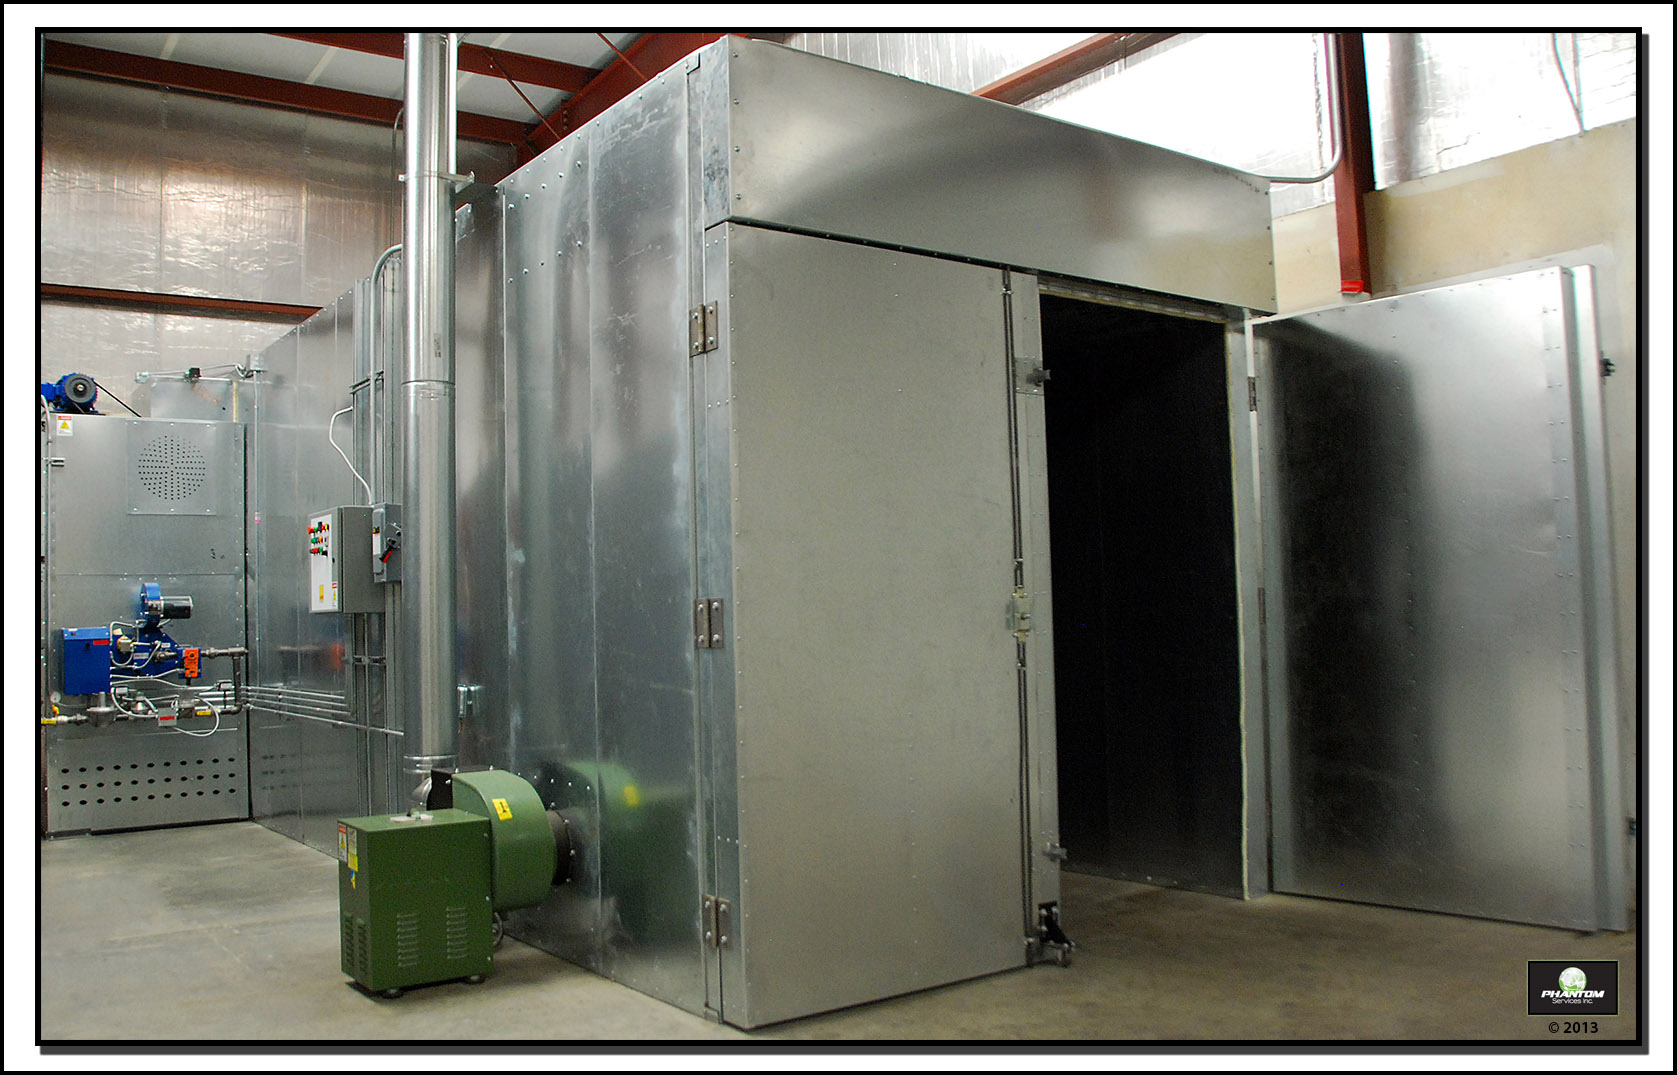 Powder Coating Curing Oven Phantom Services Inc.